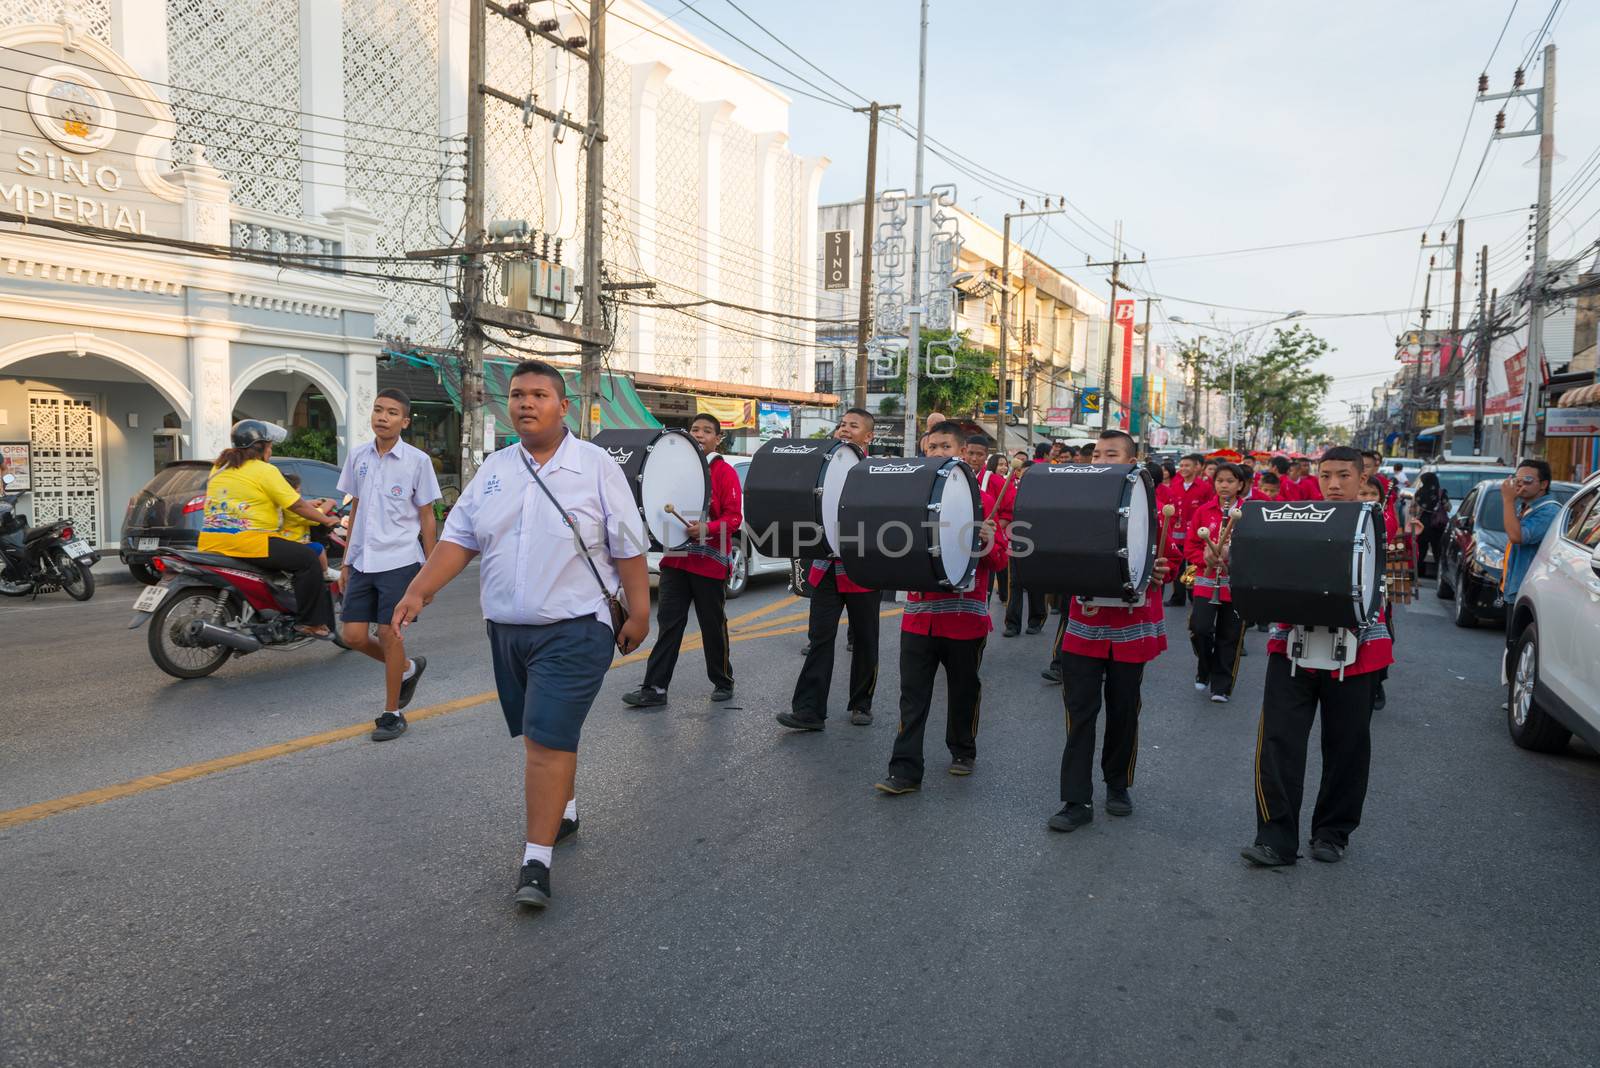 PHUKET, THAILAND - 07 FEB 2014: Musicians take part in procession of annual old Phuket town festival. 